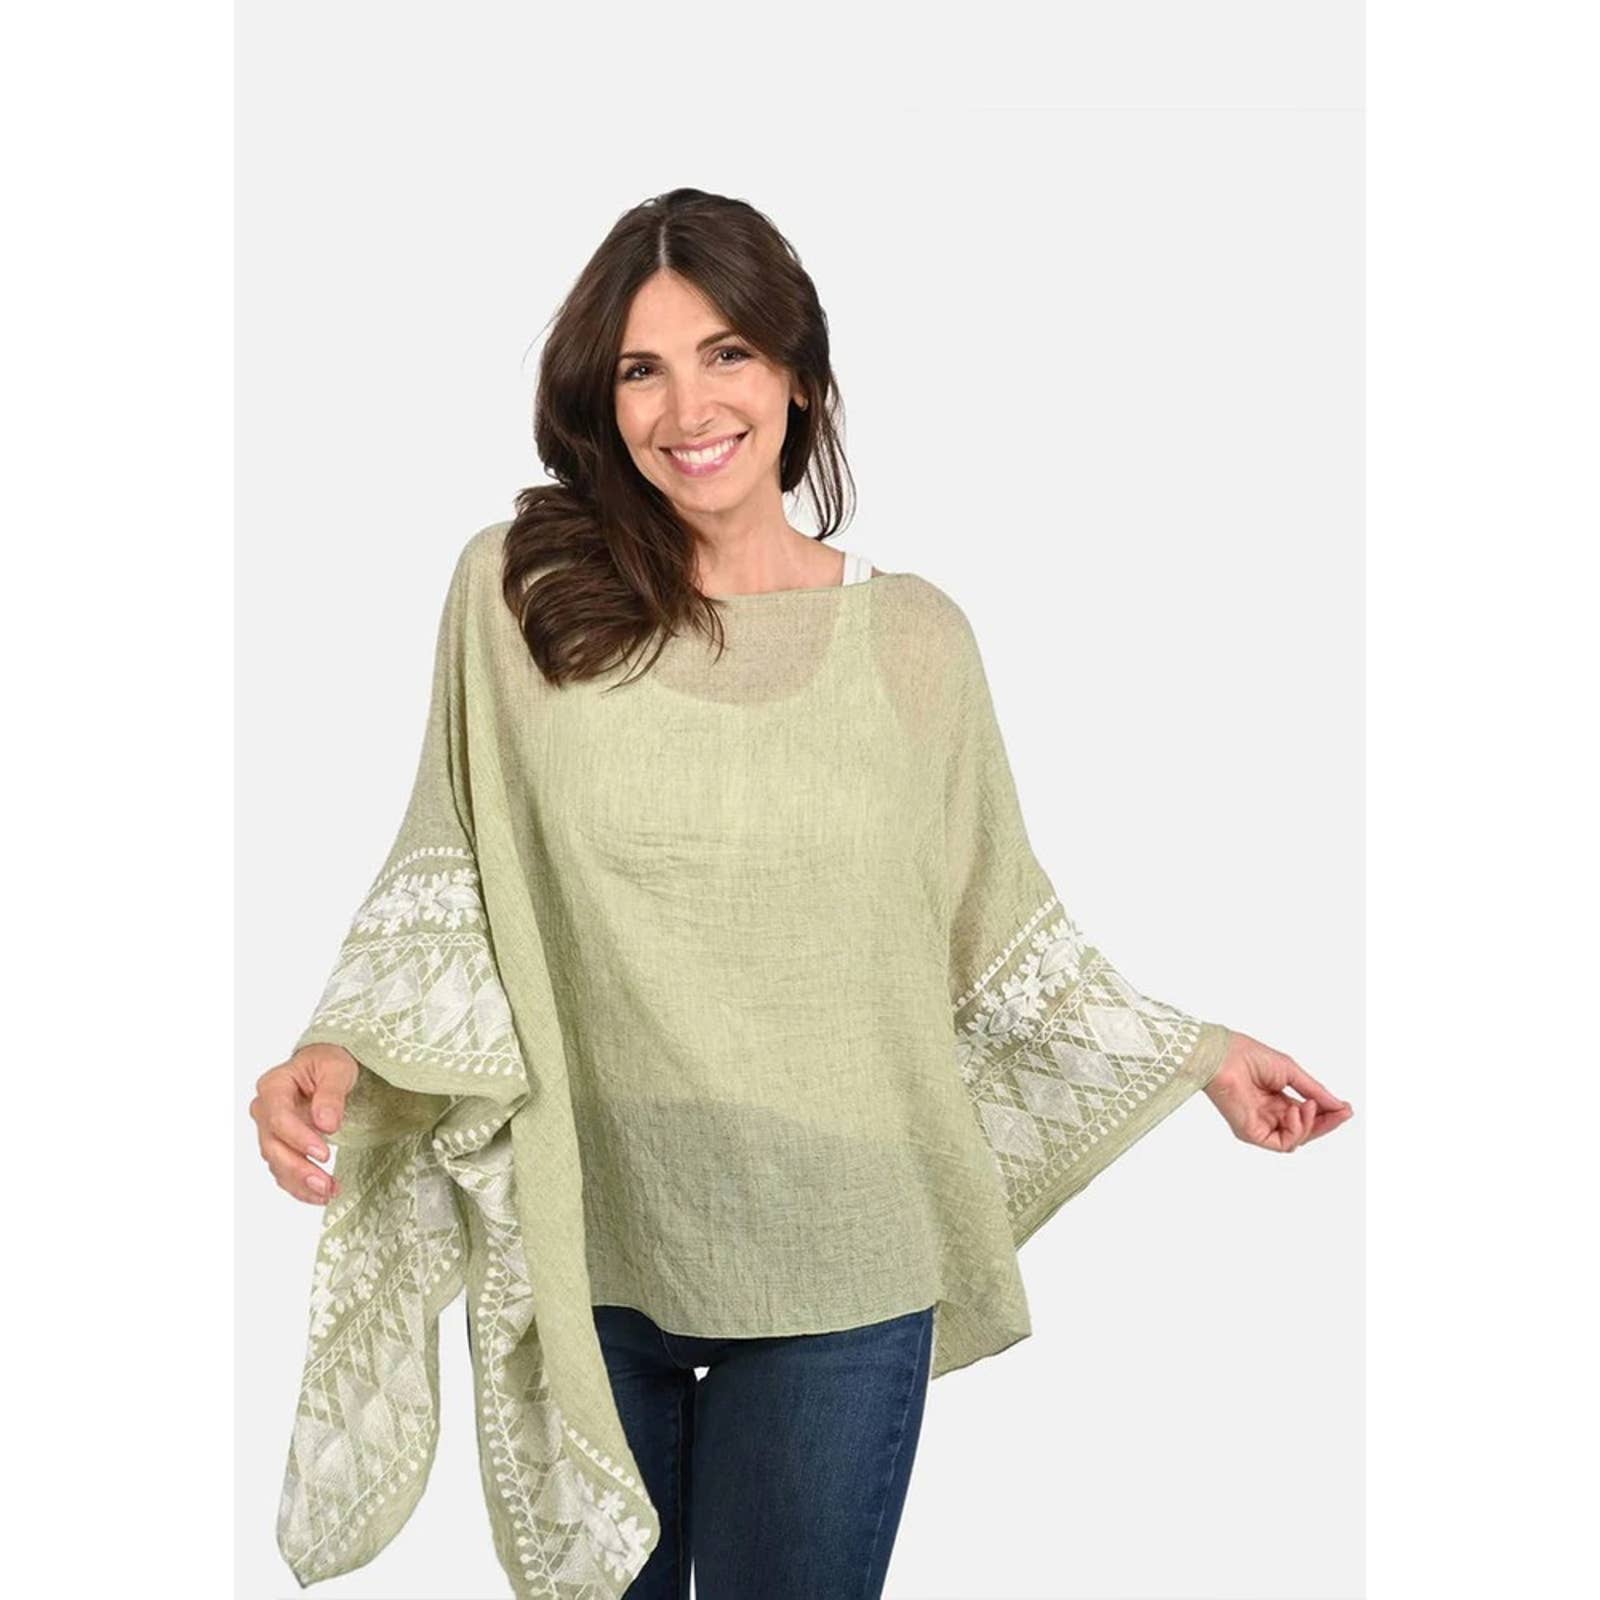 Passion Sage Green White Embroidered Sleeve Boat Neck Kaftan Top - Passion of Essence Boutique